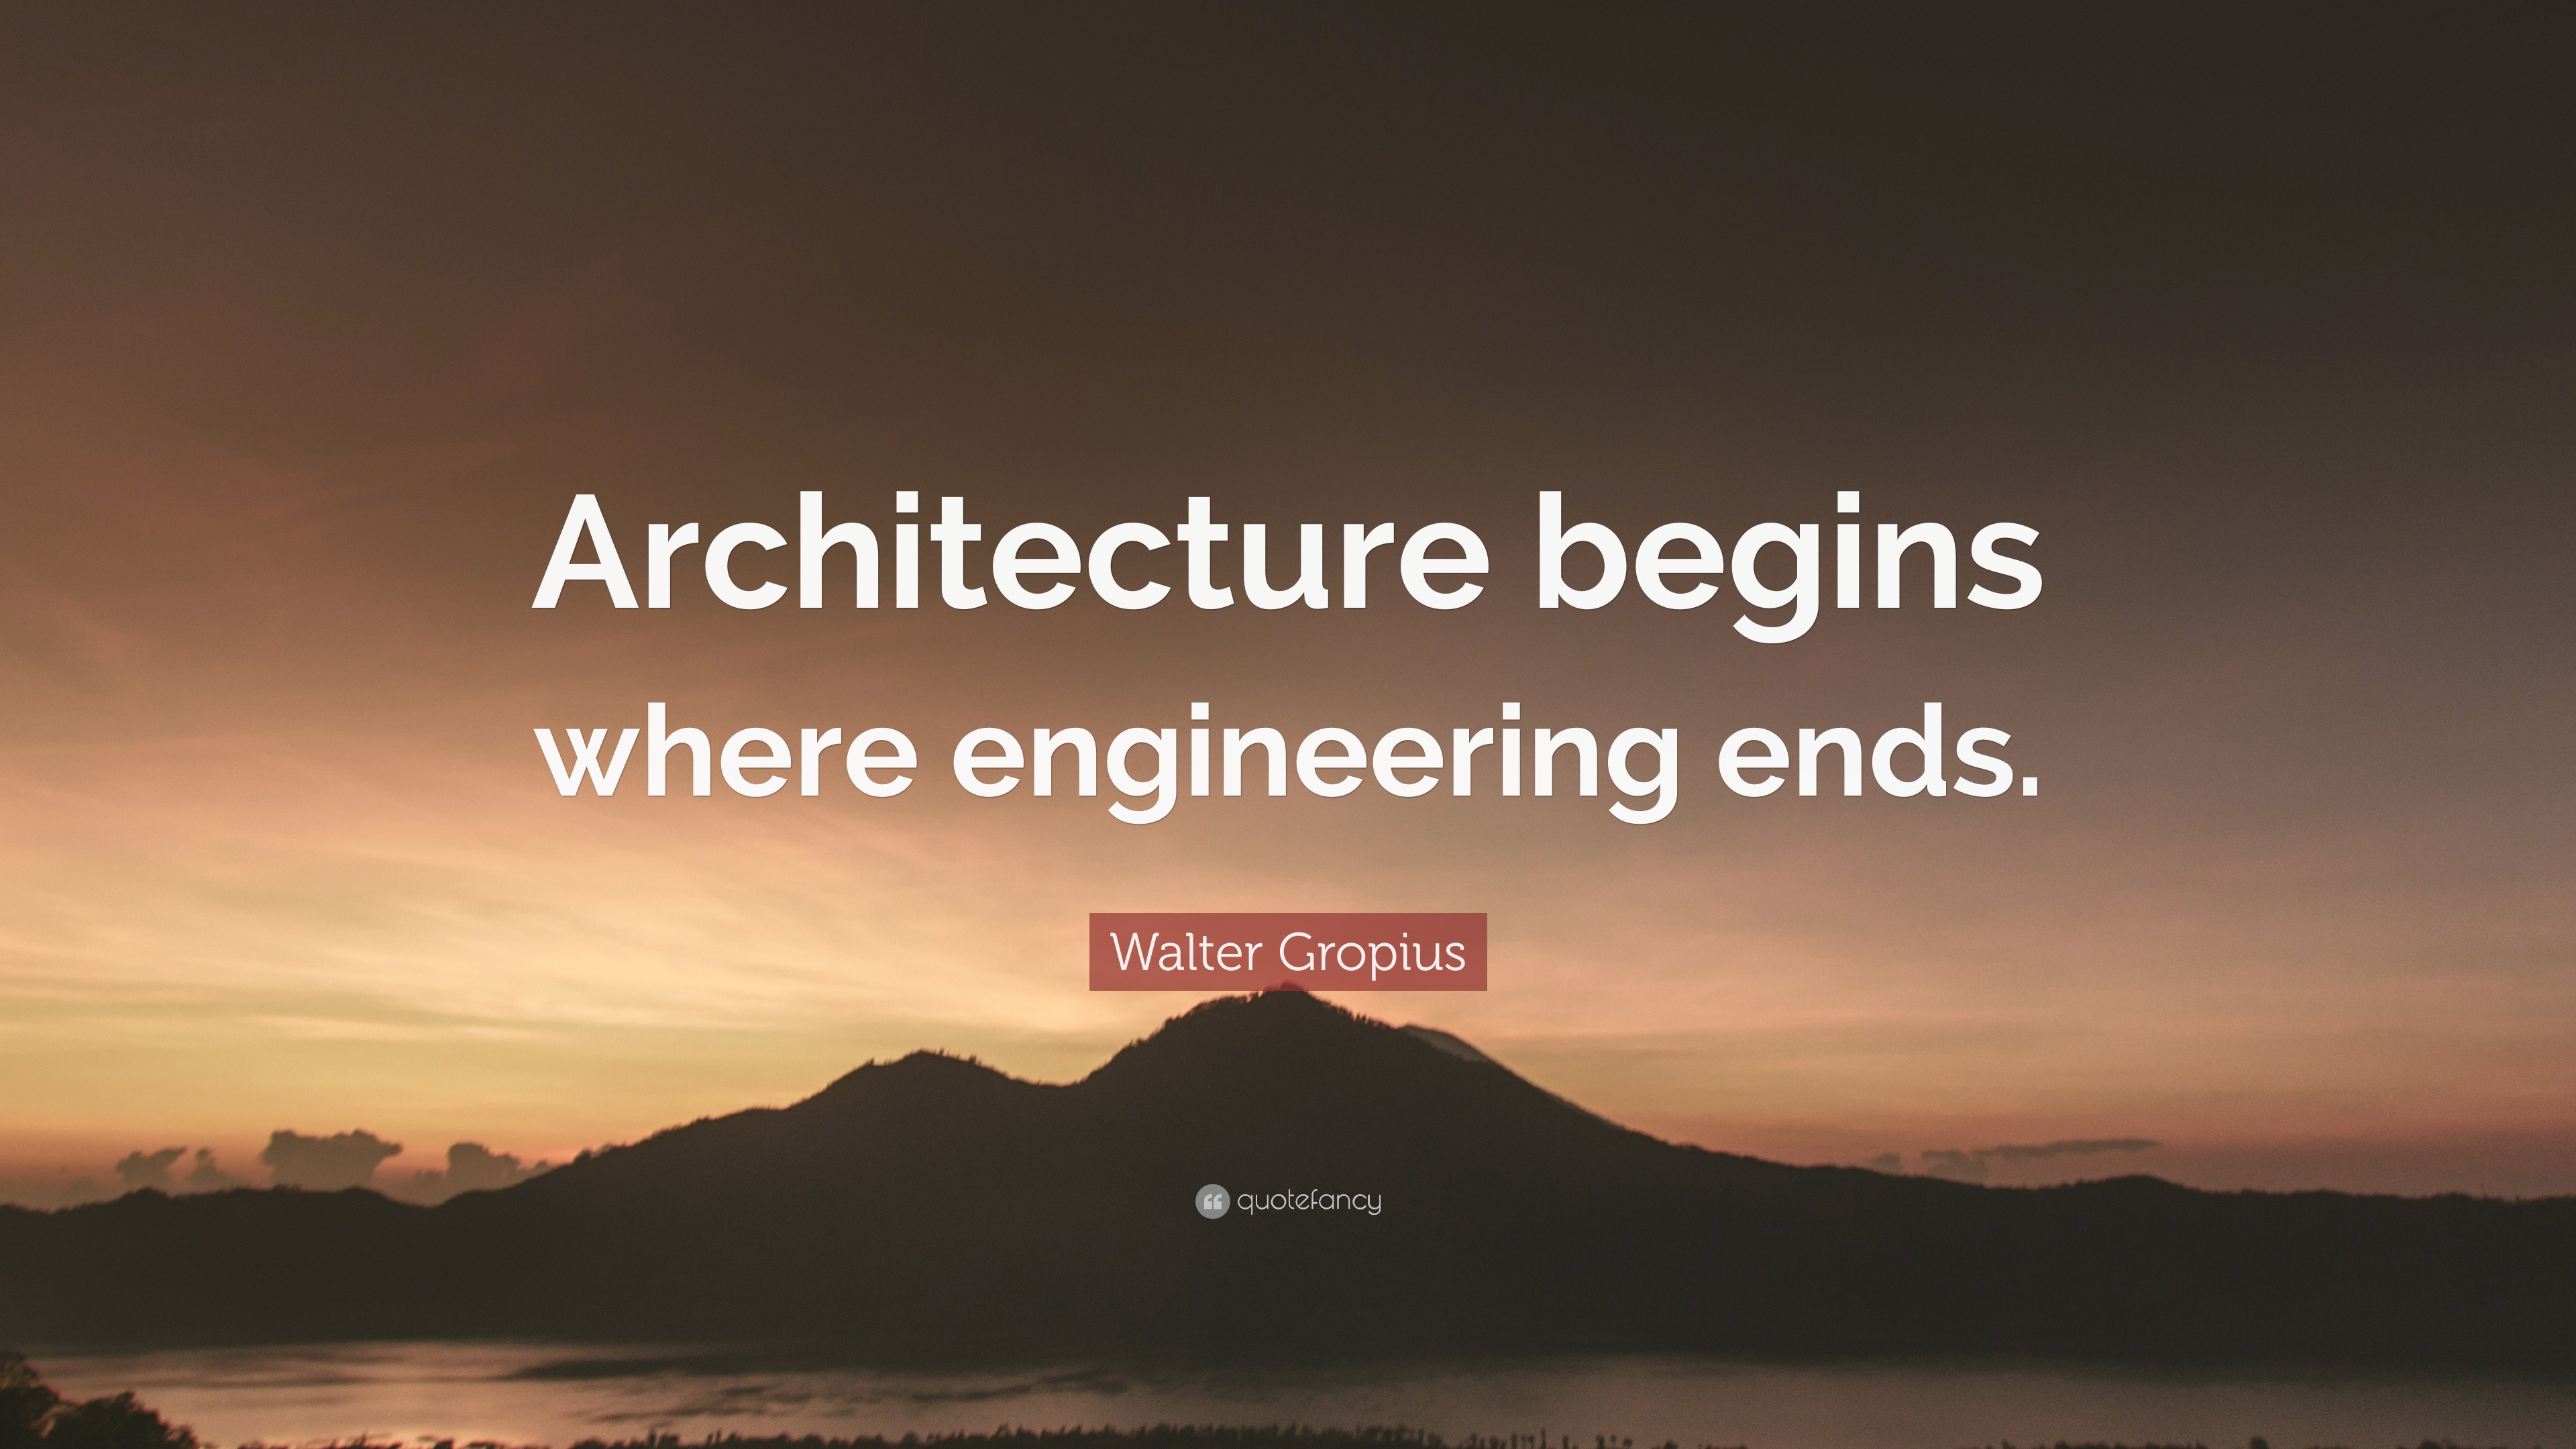 Walter Gropius Quote: “Architecture begins where engineering ends.”